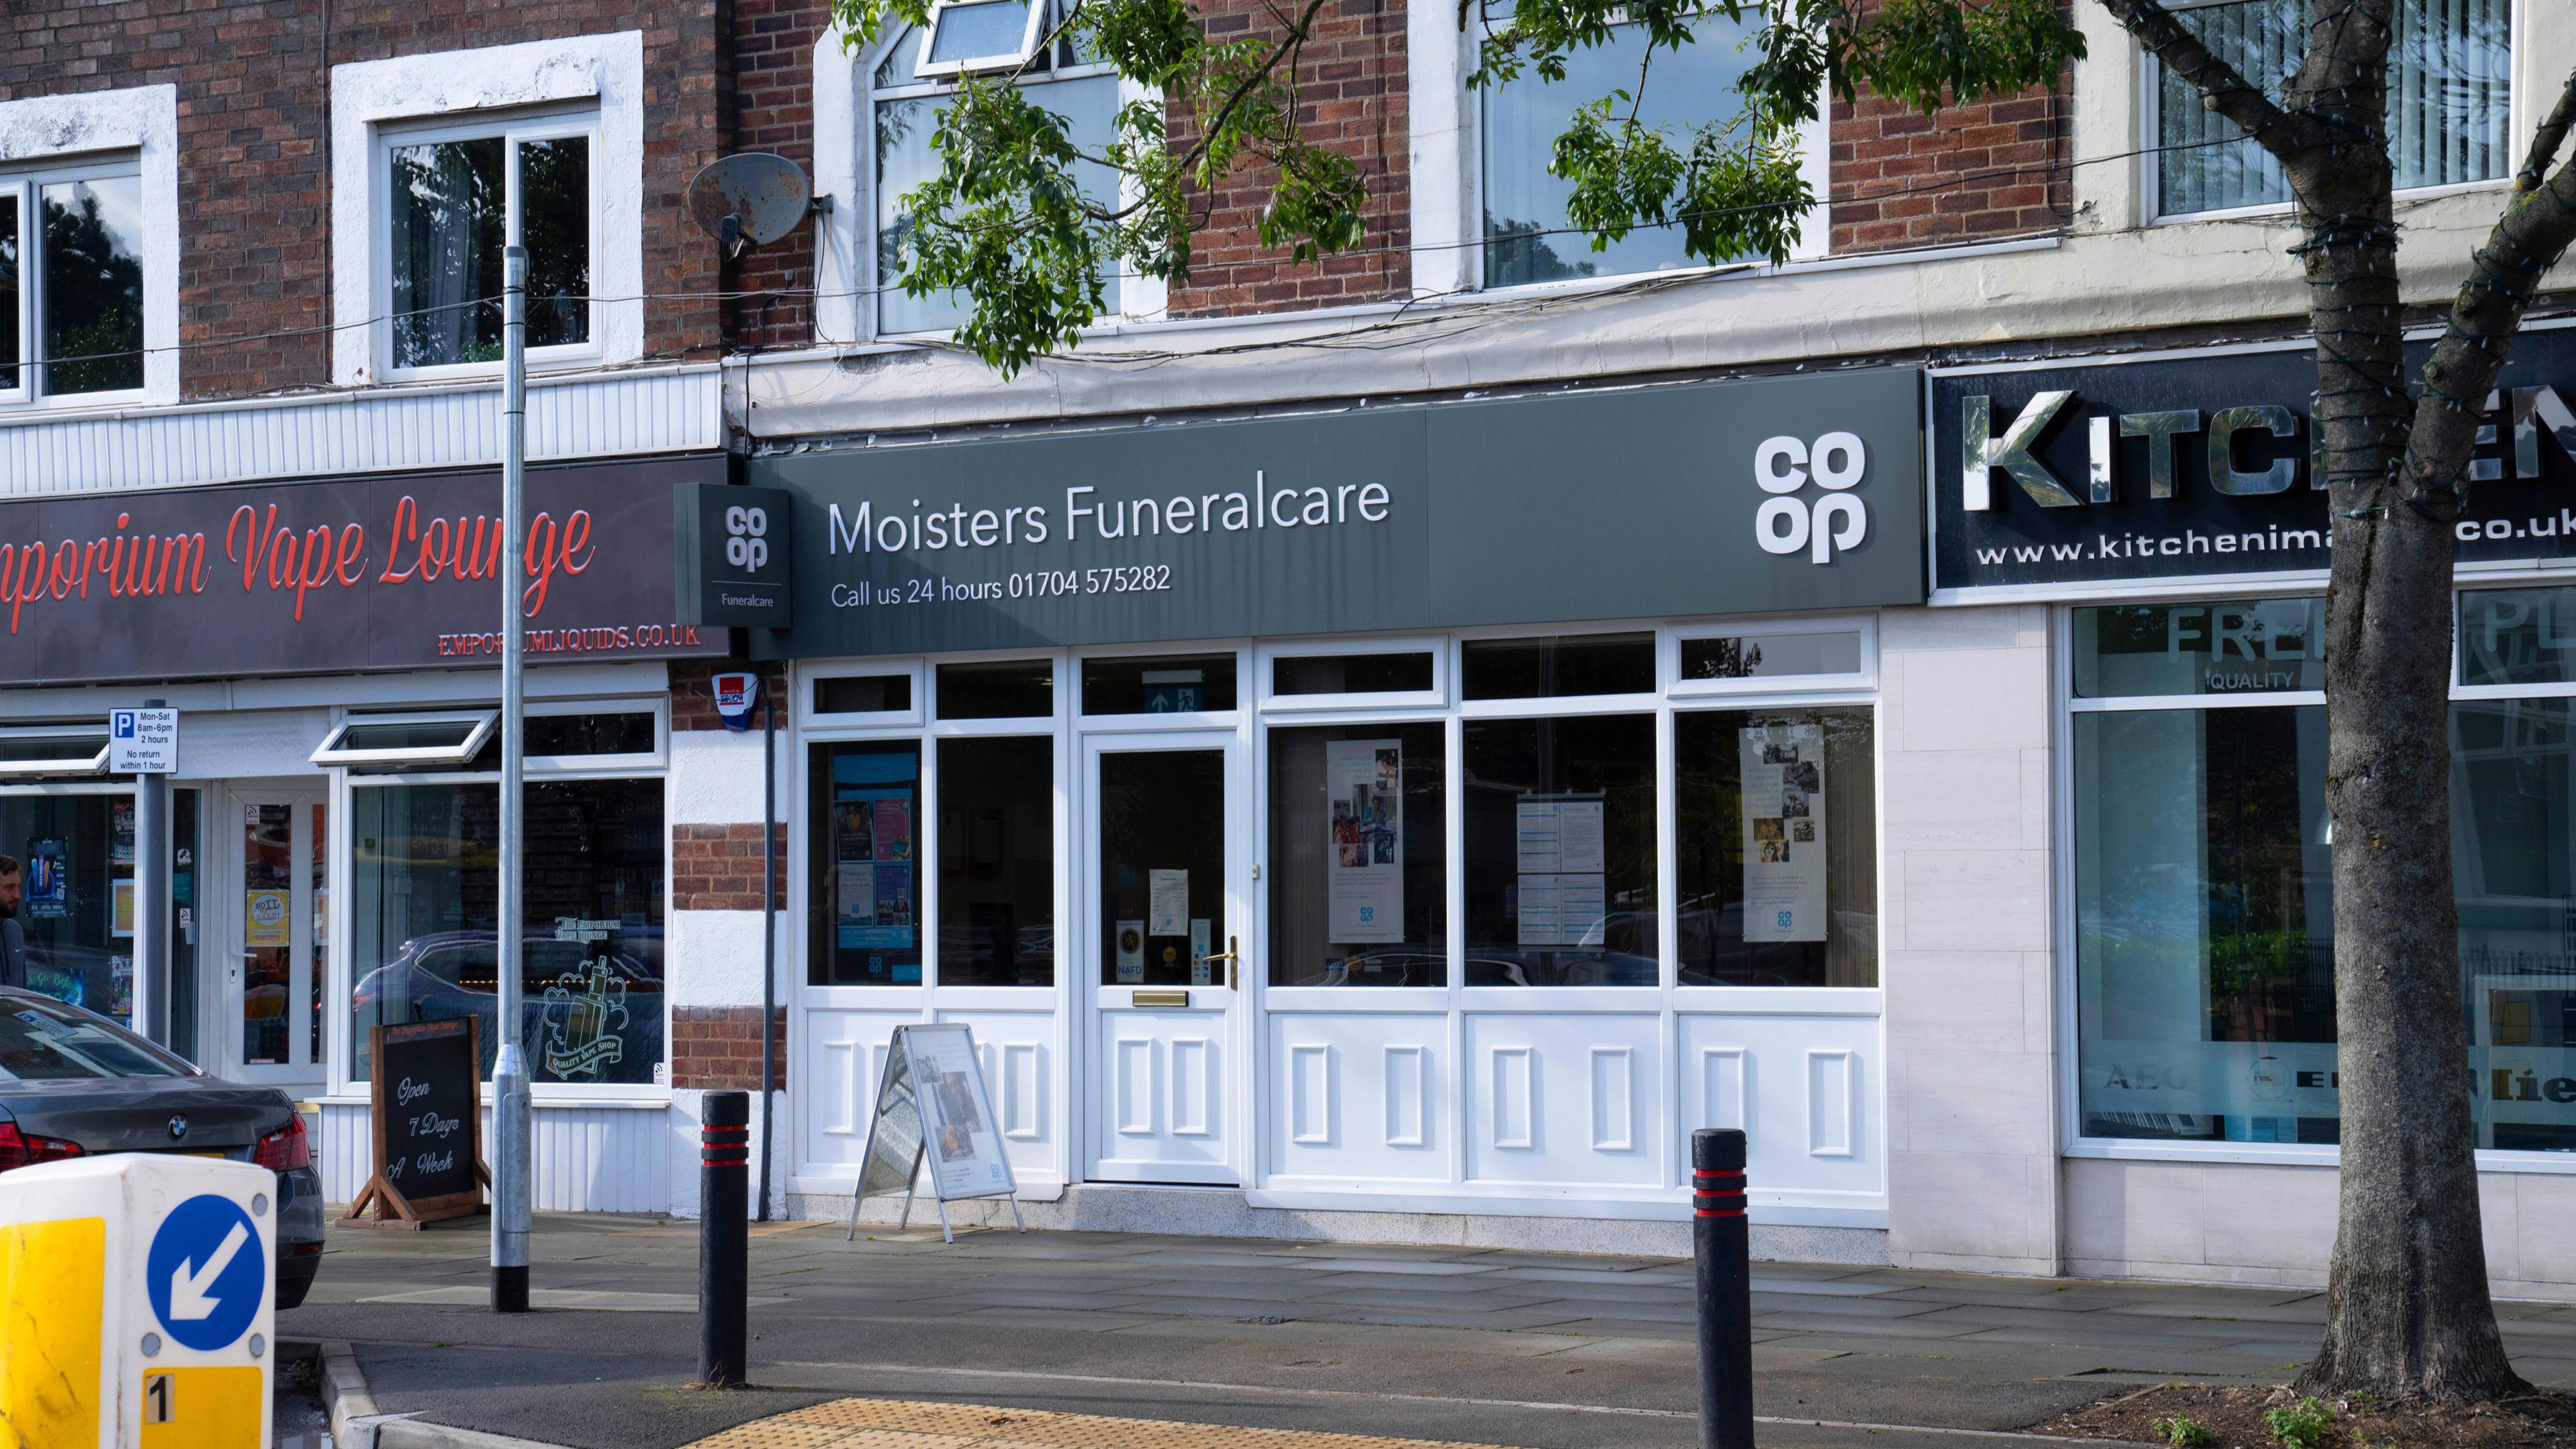 Moisters Funeralcare Ainsdale Moisters Funeralcare Southport 01704 575282